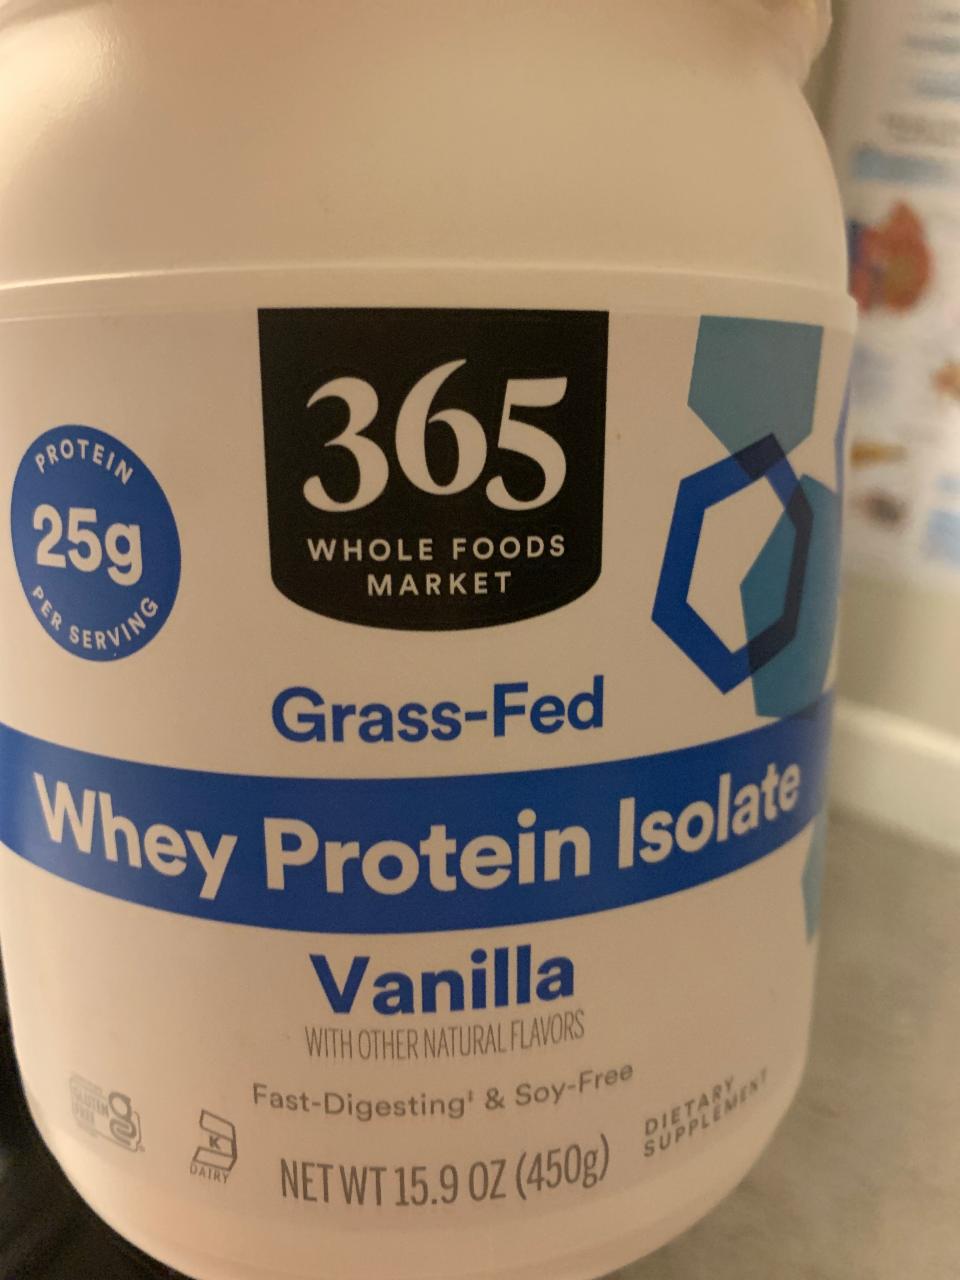 Fotografie - Grass-Fed Whey Protein Isolate Vanilla 366 Whole Foods Market